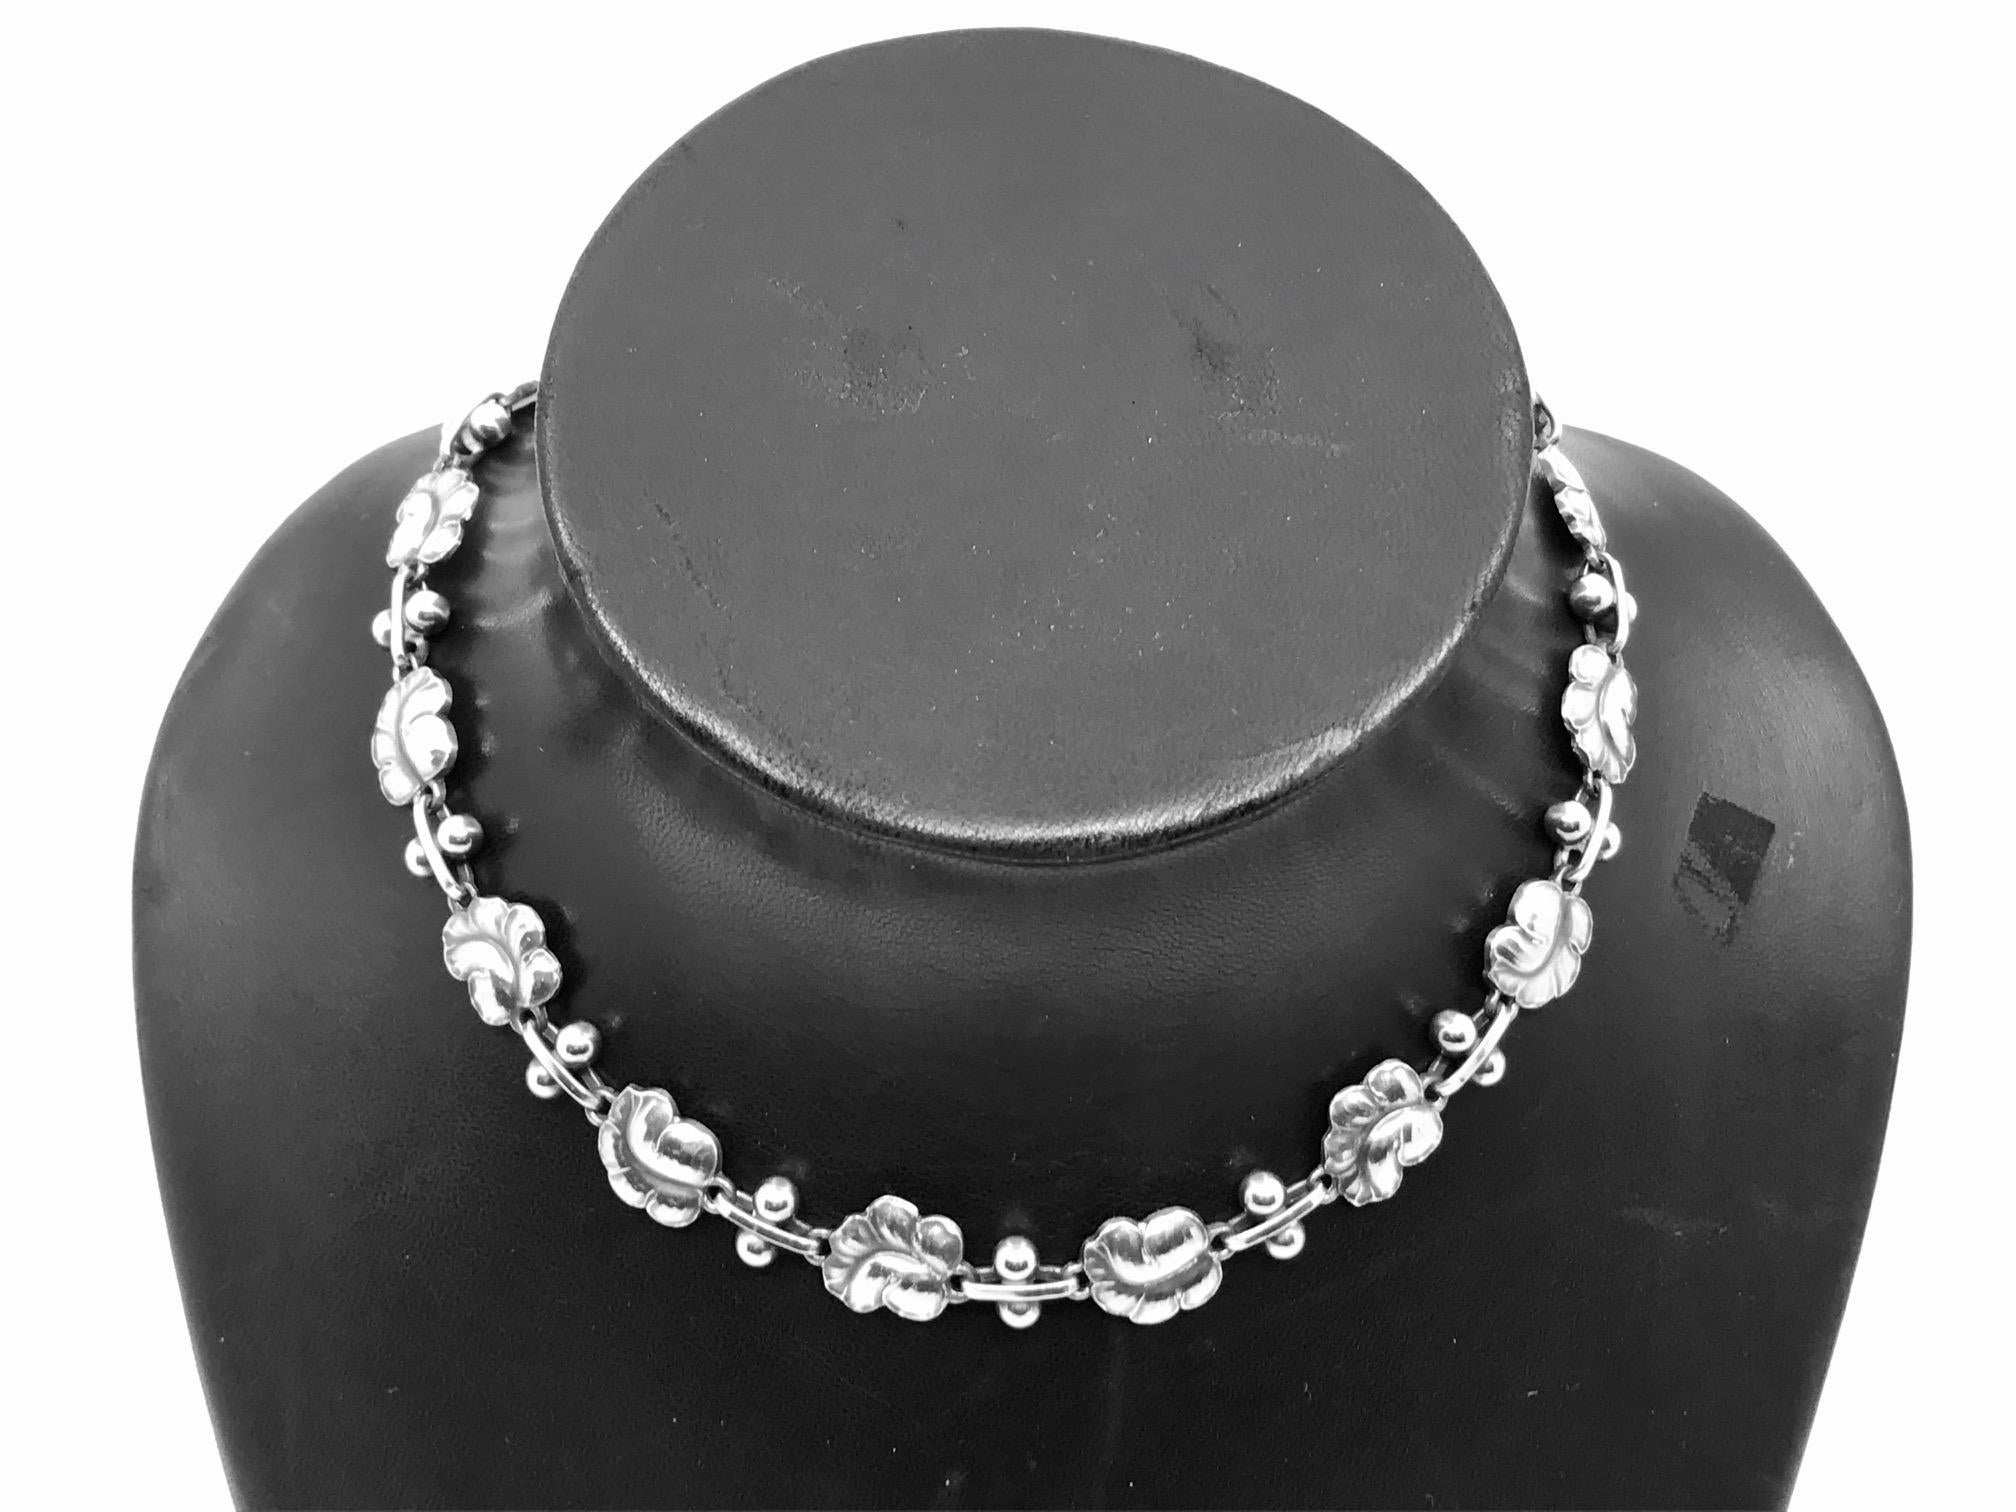 Sterling silver Georg Jensen Grapes necklace, design #96A by Harald Nielsen from the 1920s.
Measures 15 5/8